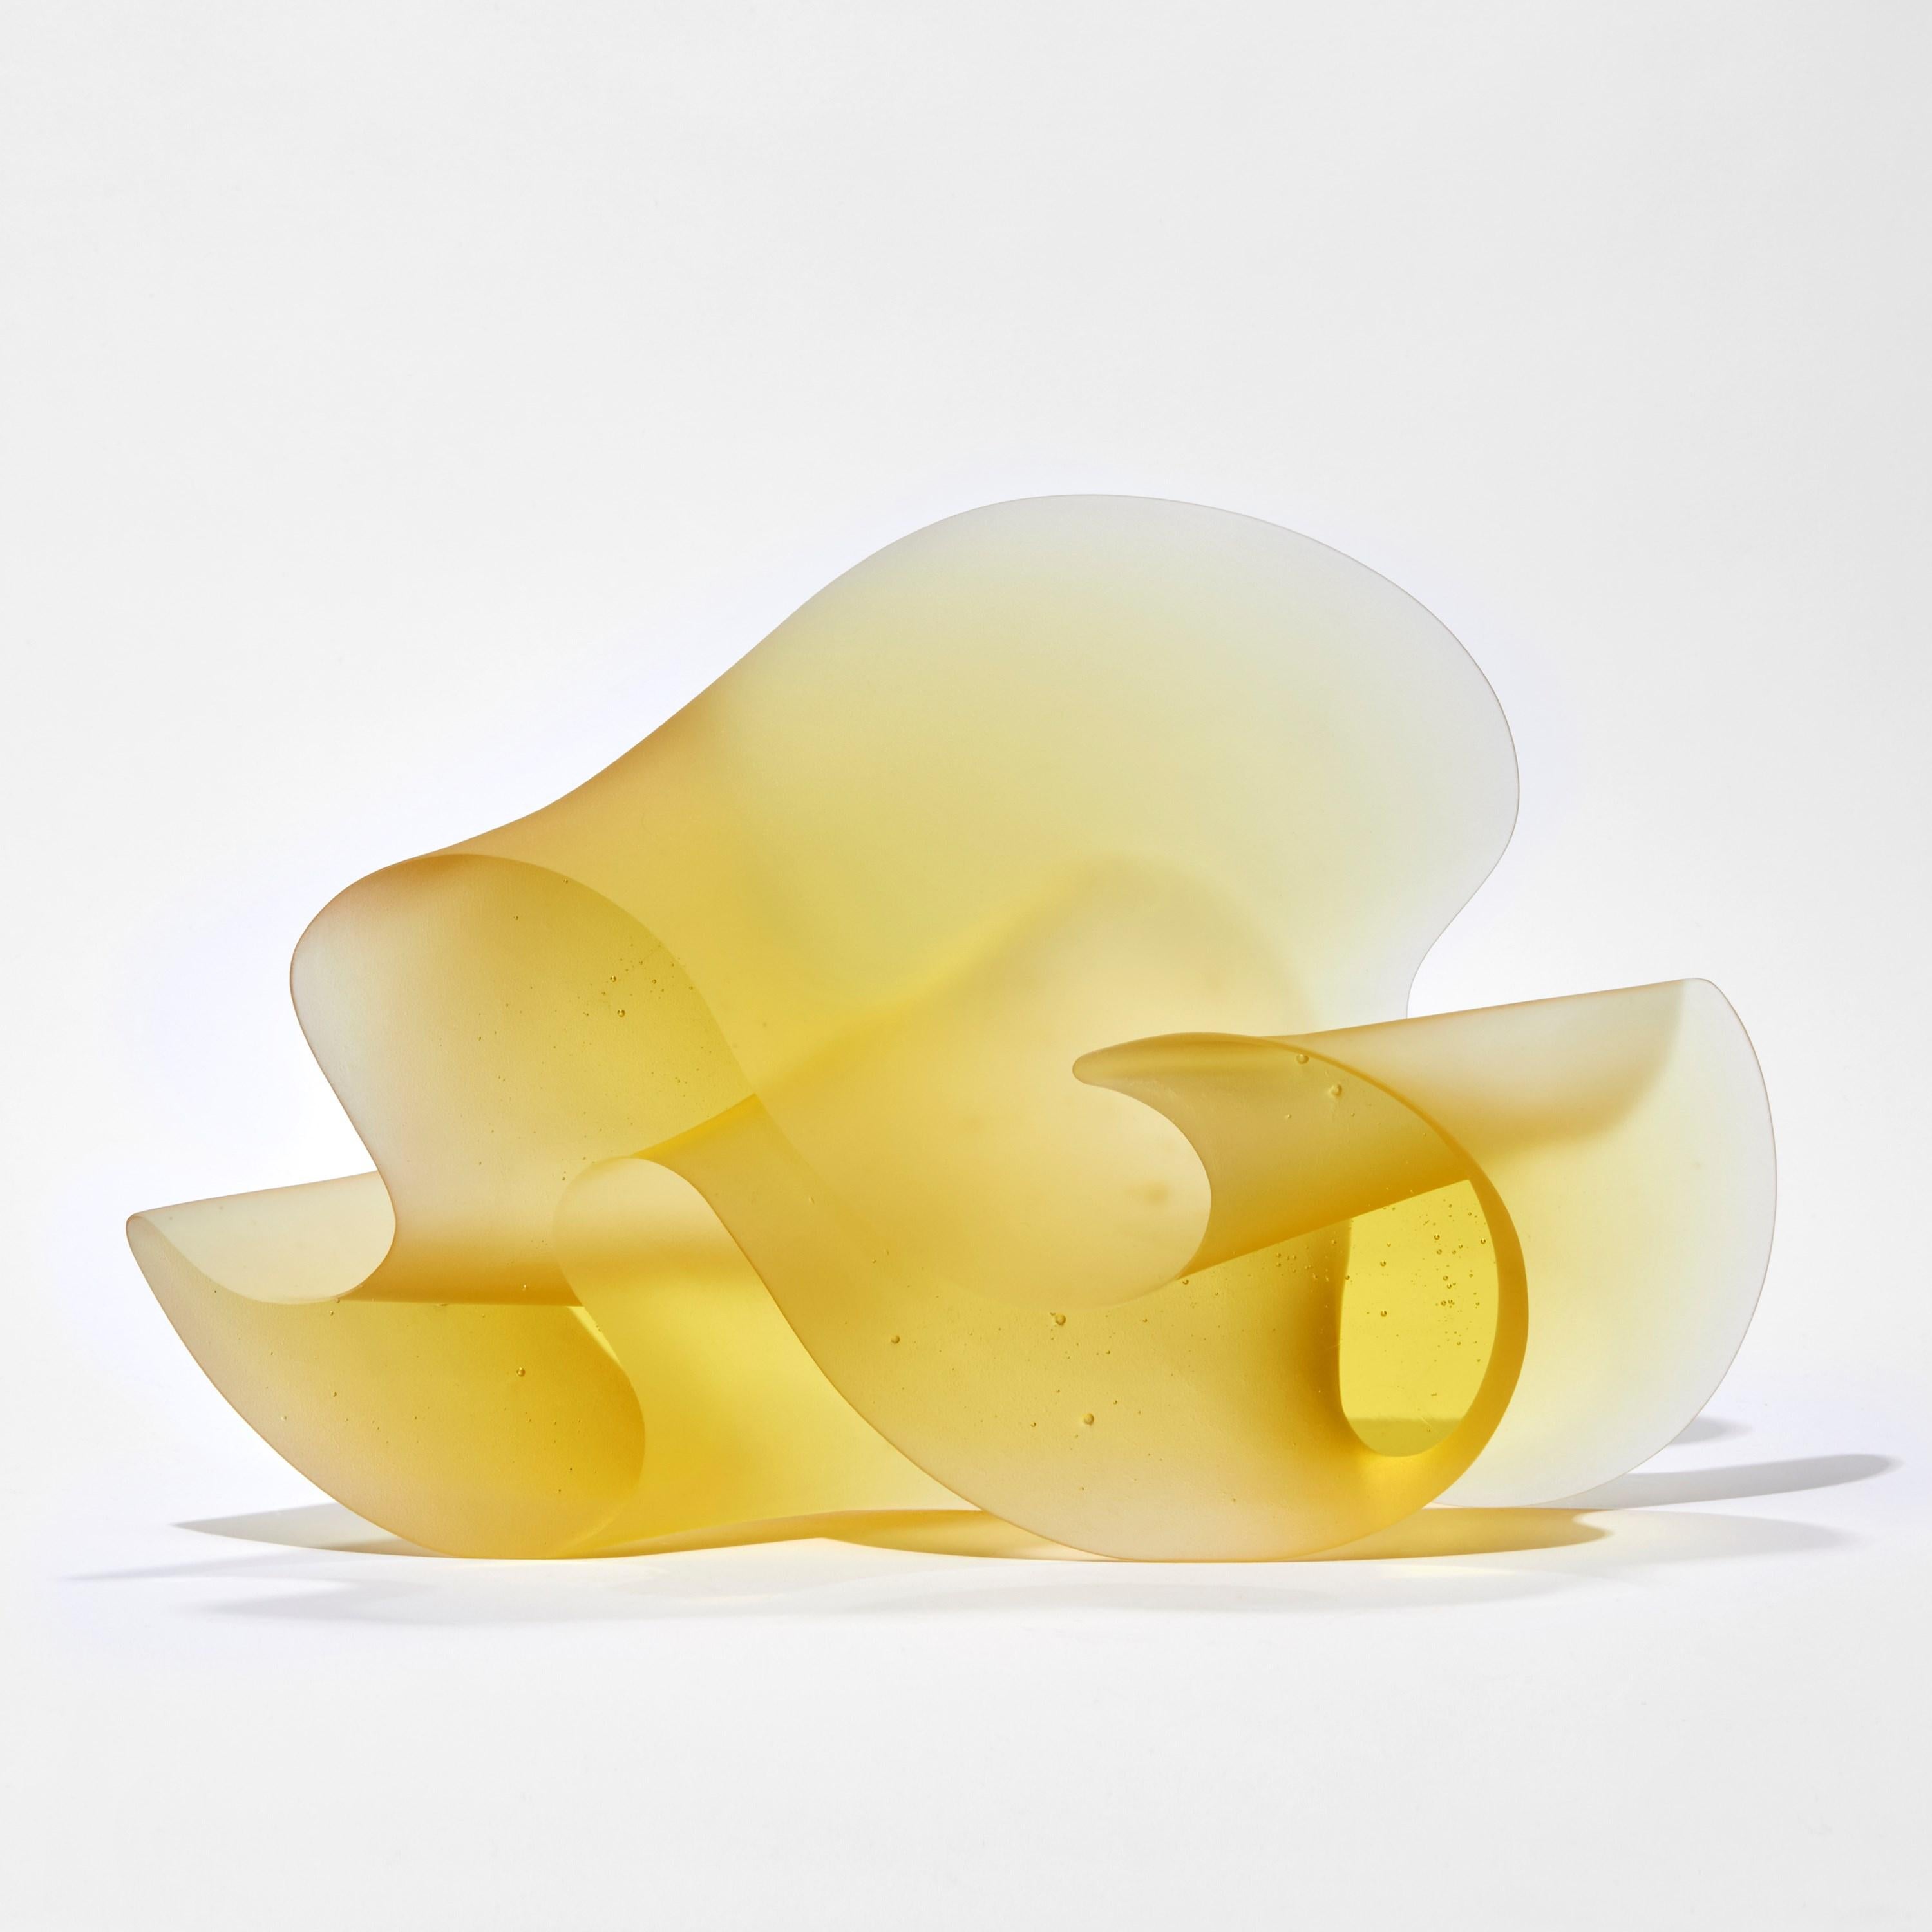 'Flow Yellow' is a unique cast and hand-made glass sculpture by the Danish artist, Karin Mørch.

Mørch’s inspiration often derives from simple expressions and in the contrast between the linear and the tilted. She sees beauty in the natural realm